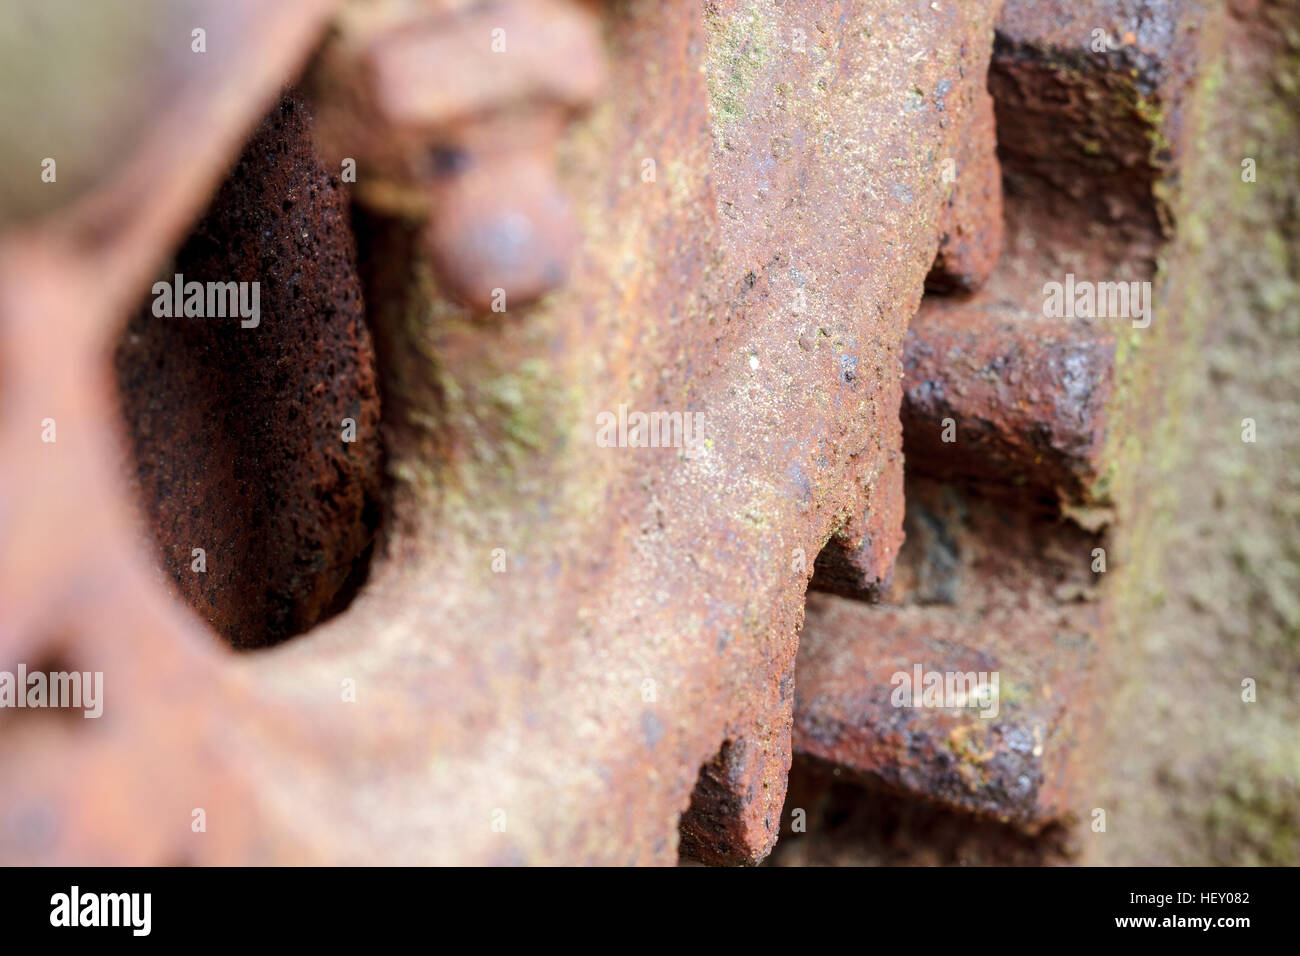 Close up of rusty gear on abandoned farm equipment. Stock Photo